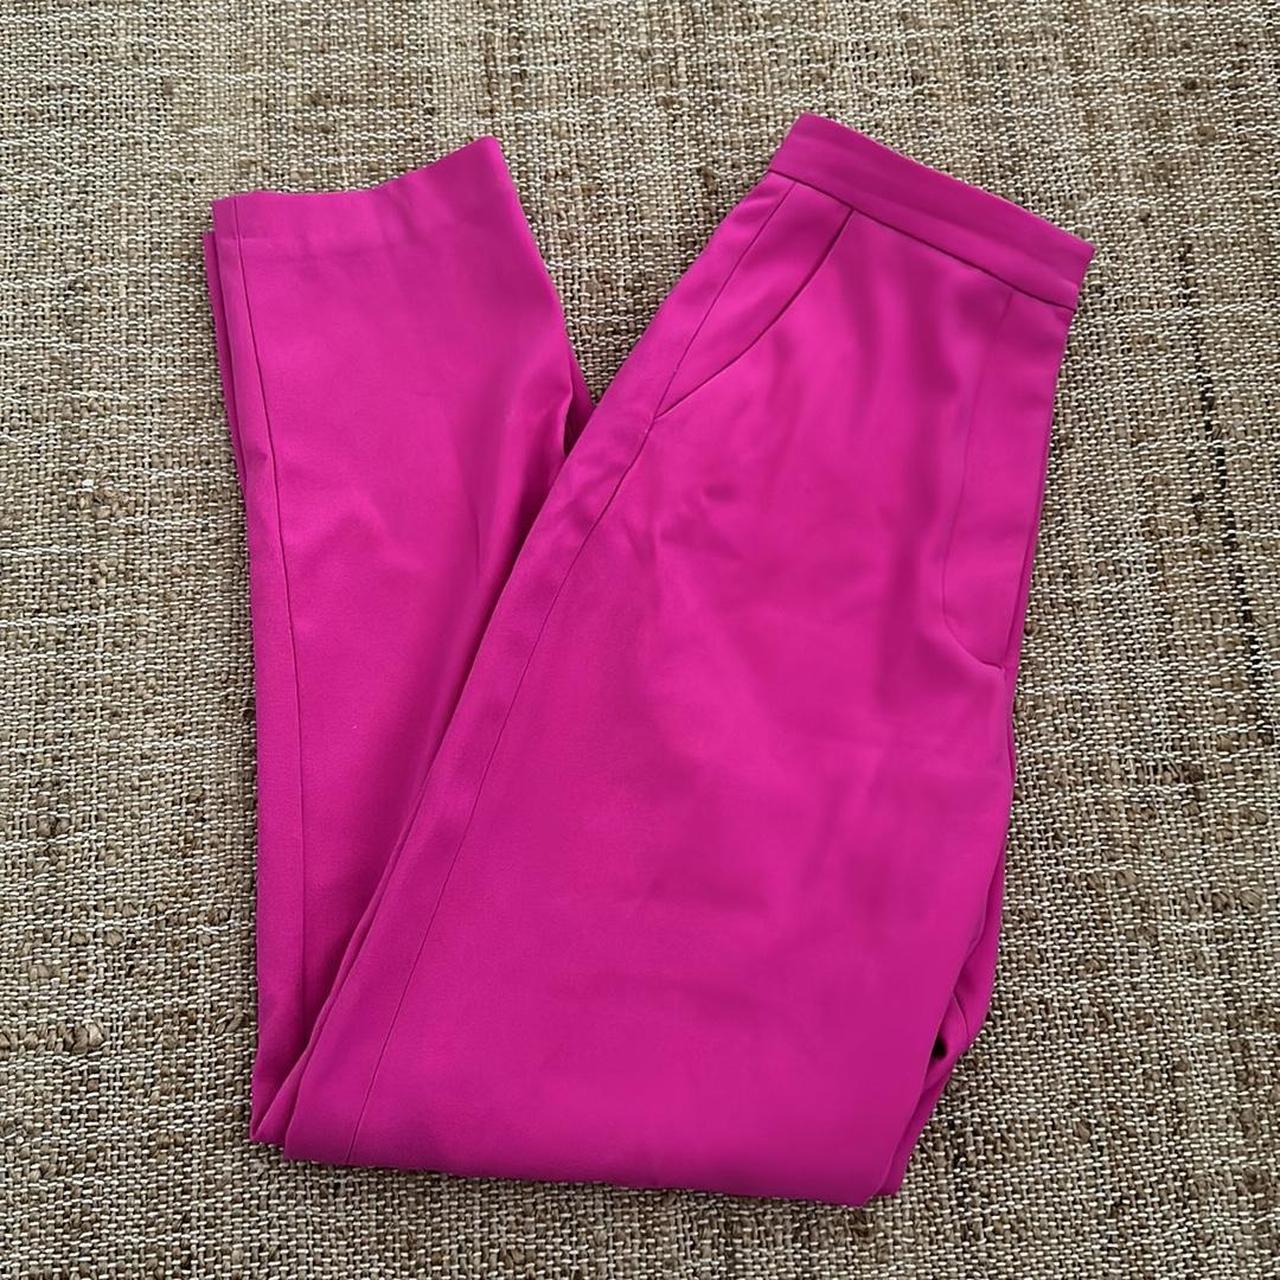 House of CB London Hot Pink Trousers Size XS - like... - Depop